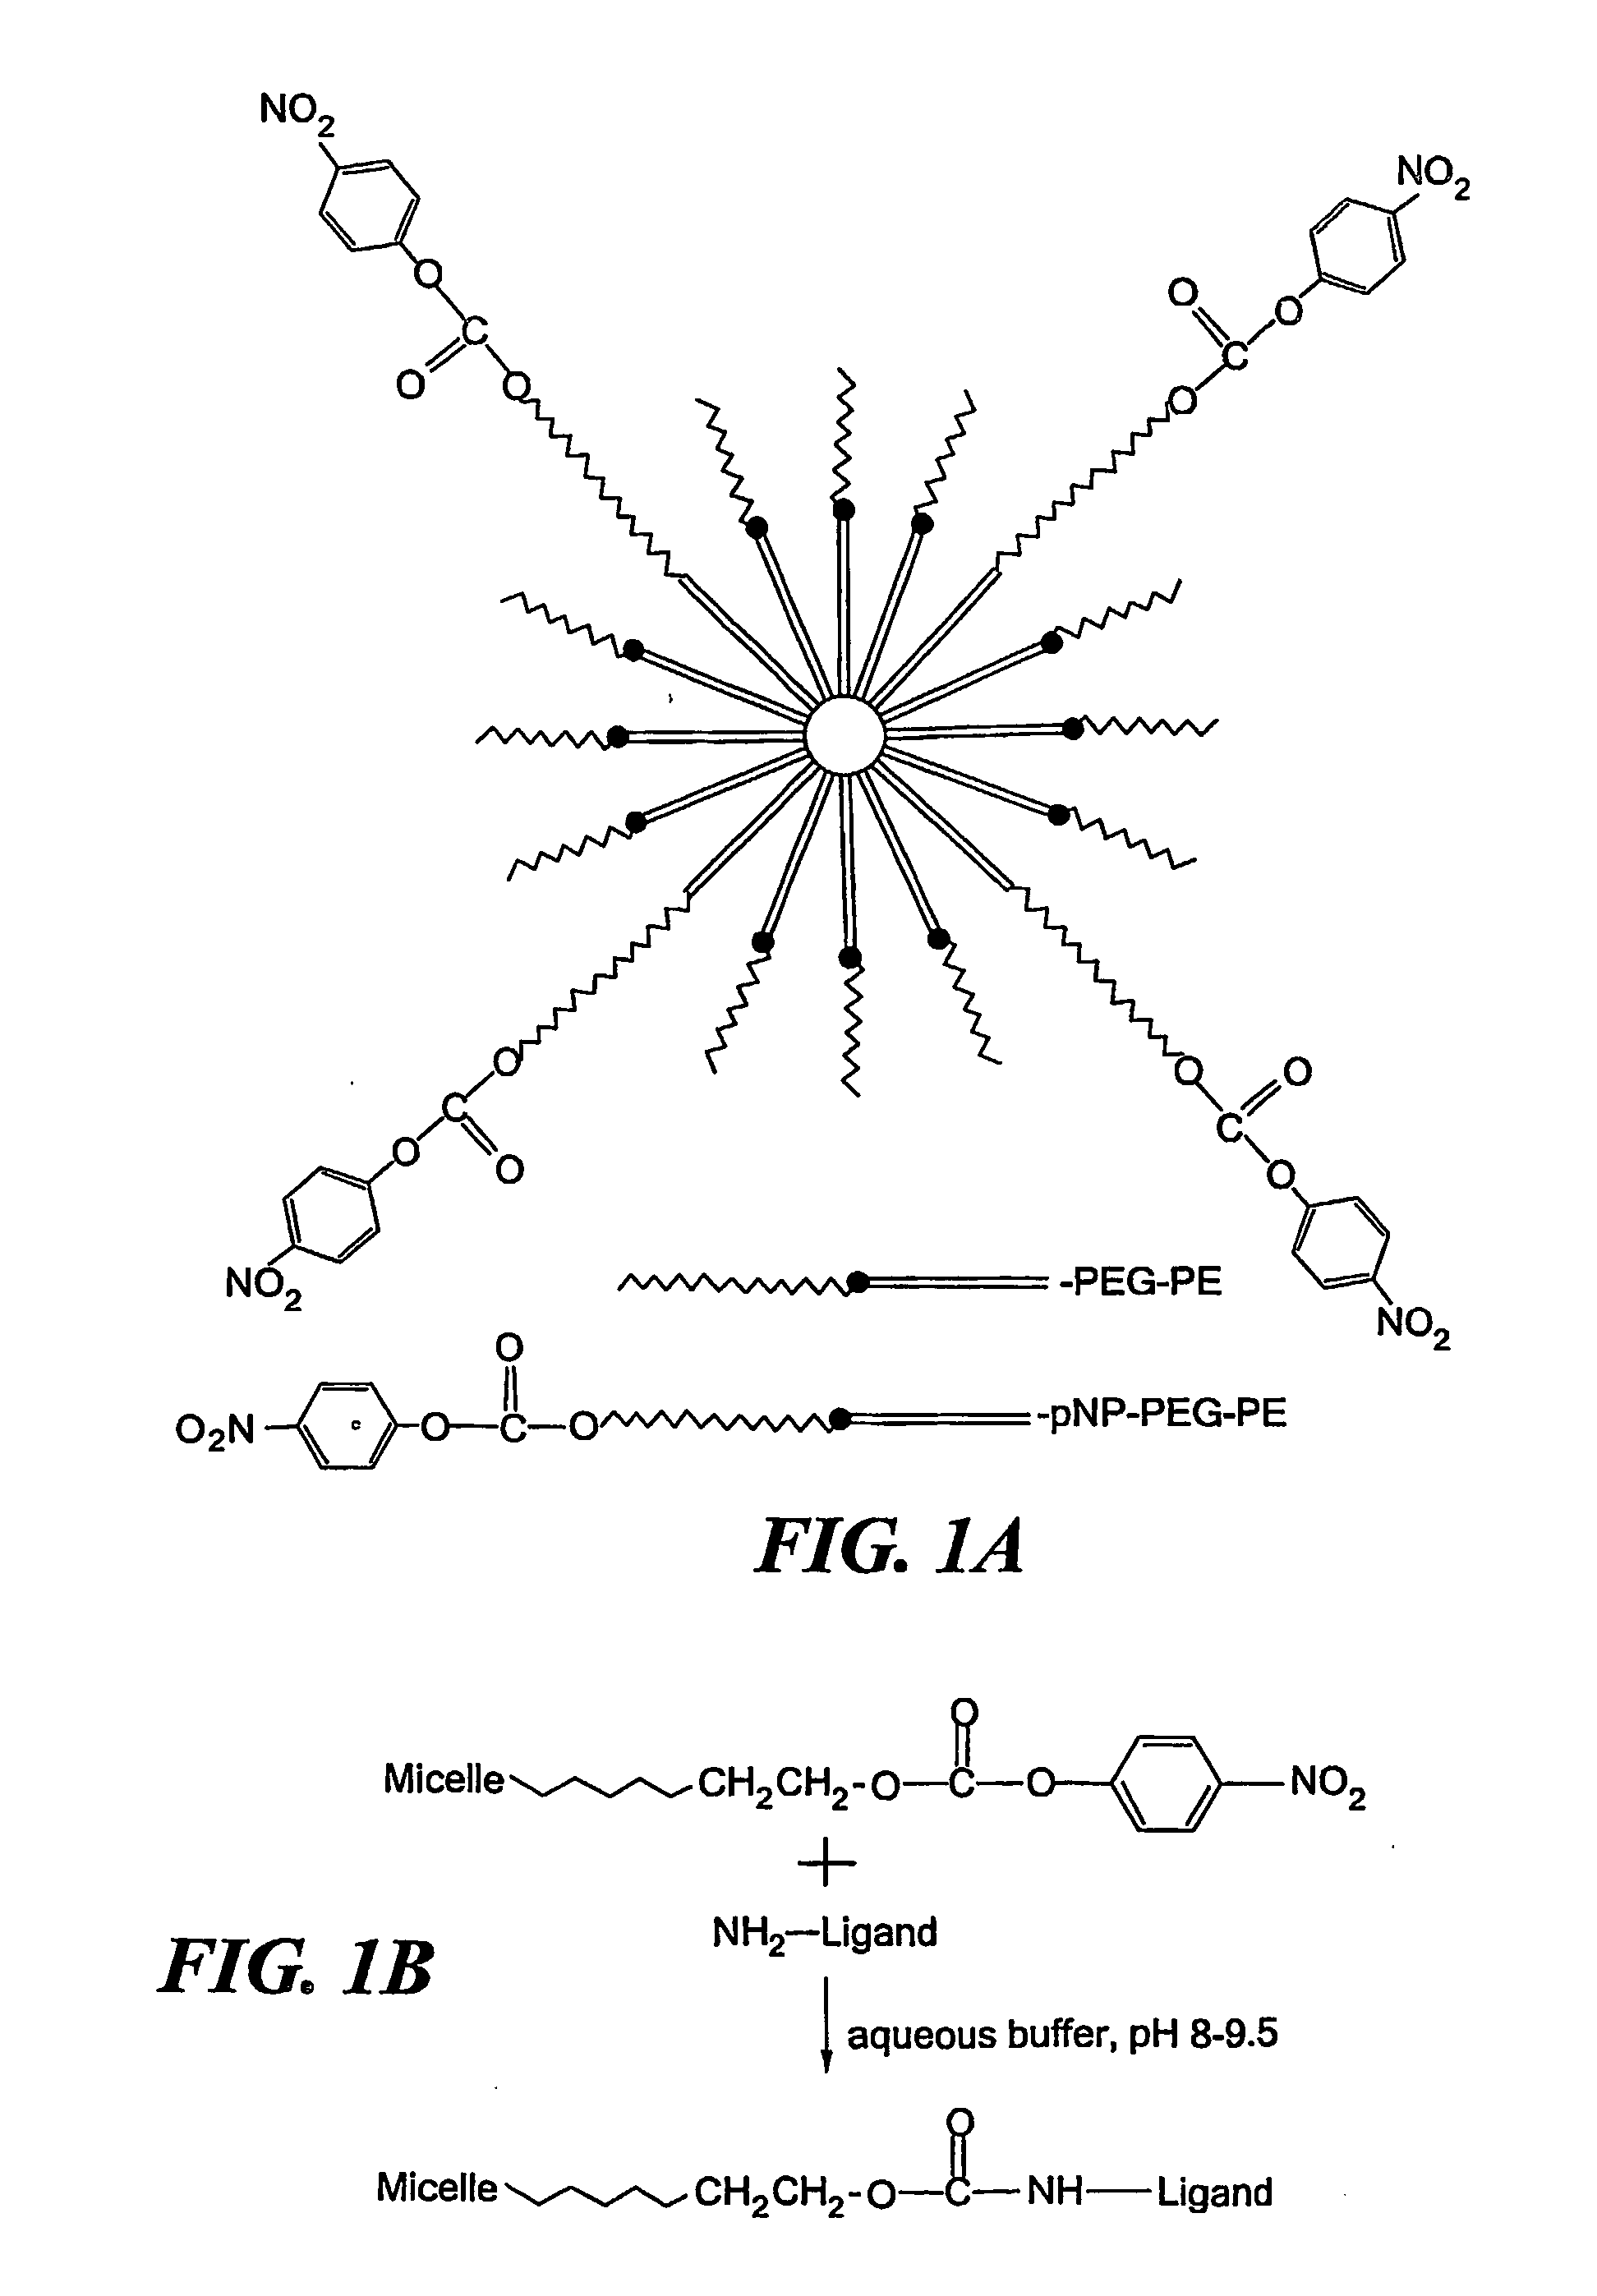 Micelle delivery system loaded with a pharmaceutical agent